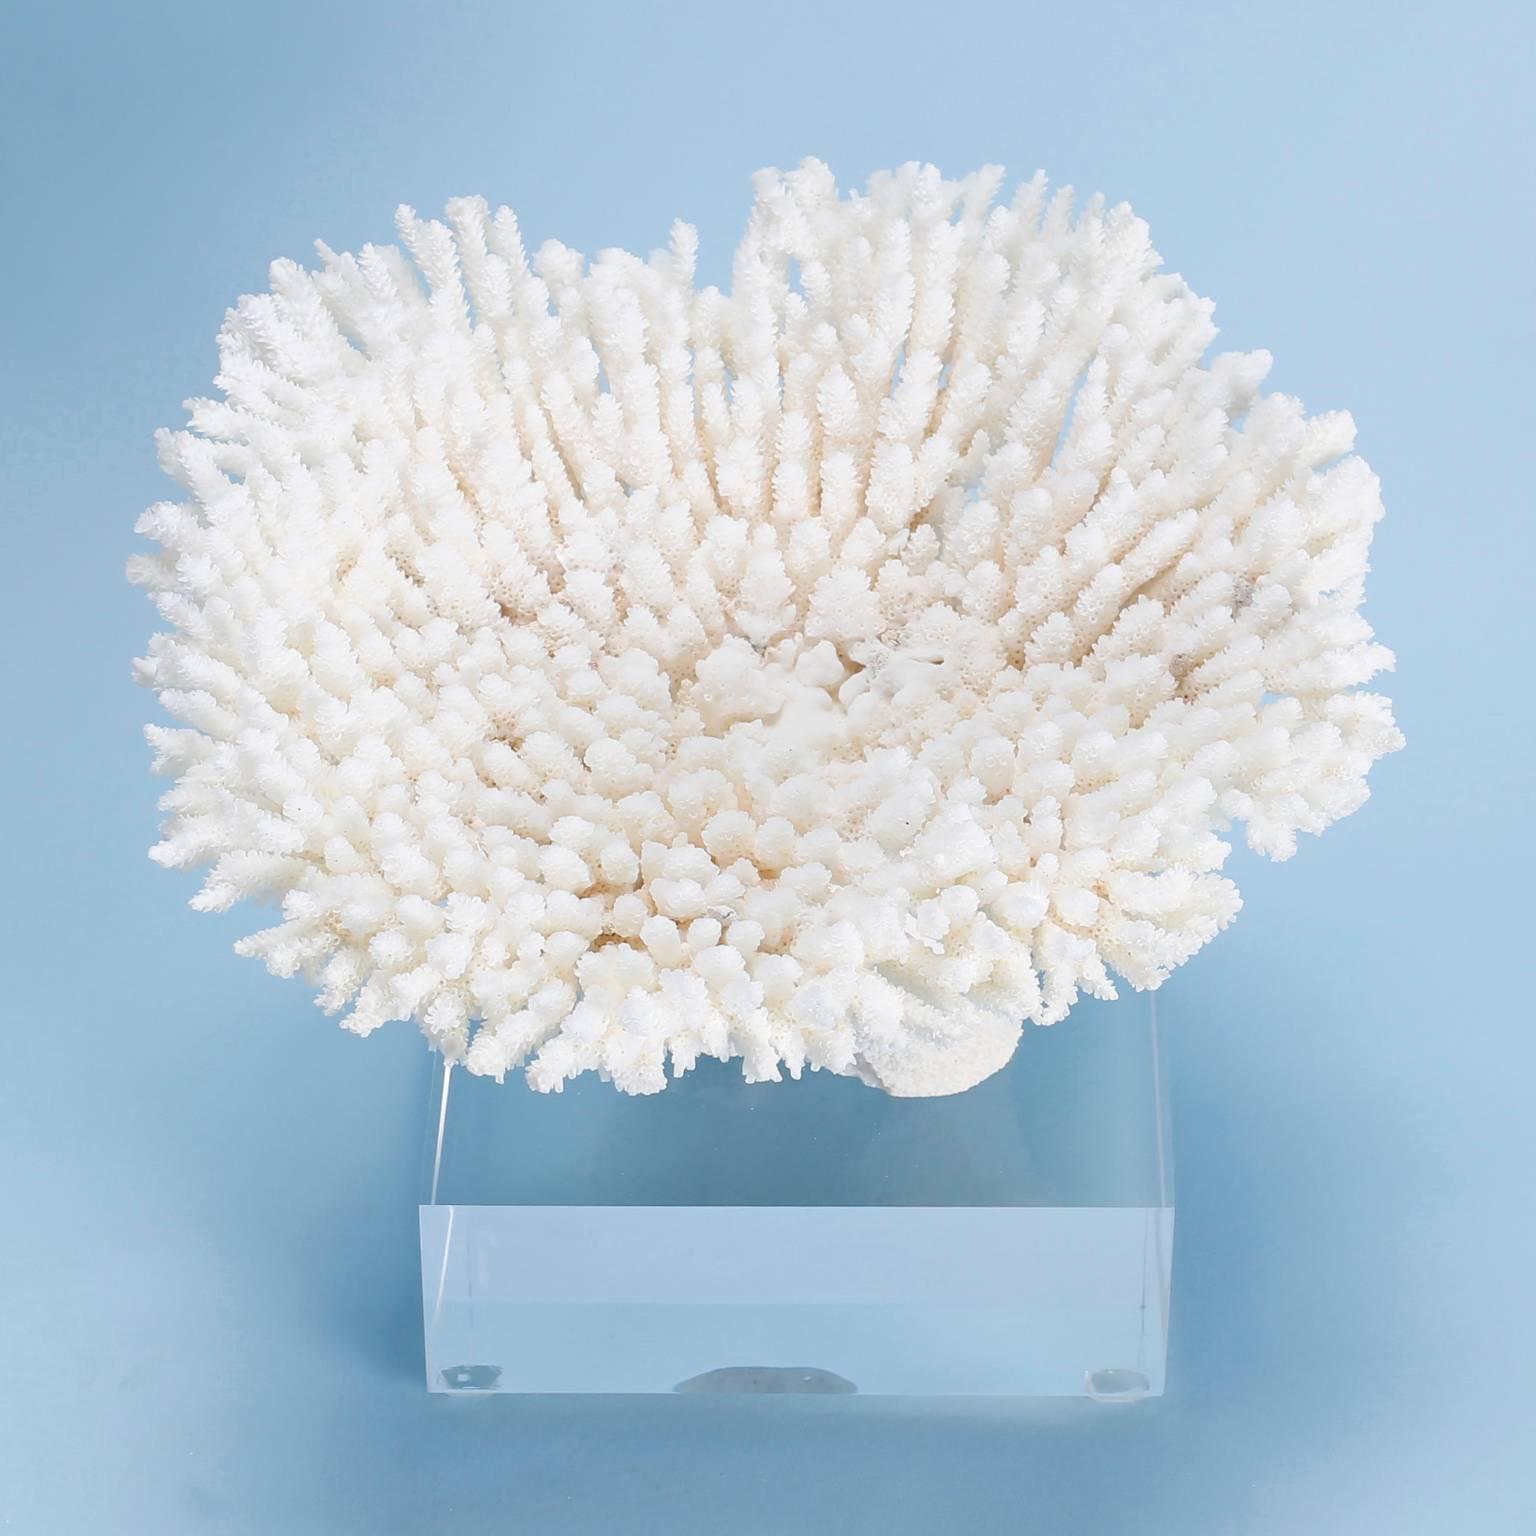 Table coral specimen with an optimistic upward posturing and alluring, bleached organic white palette. Presented on a Lucite block to enhance sculptural elements. 

Coral cannot be exported out of the USA without Cities permits. These permits are